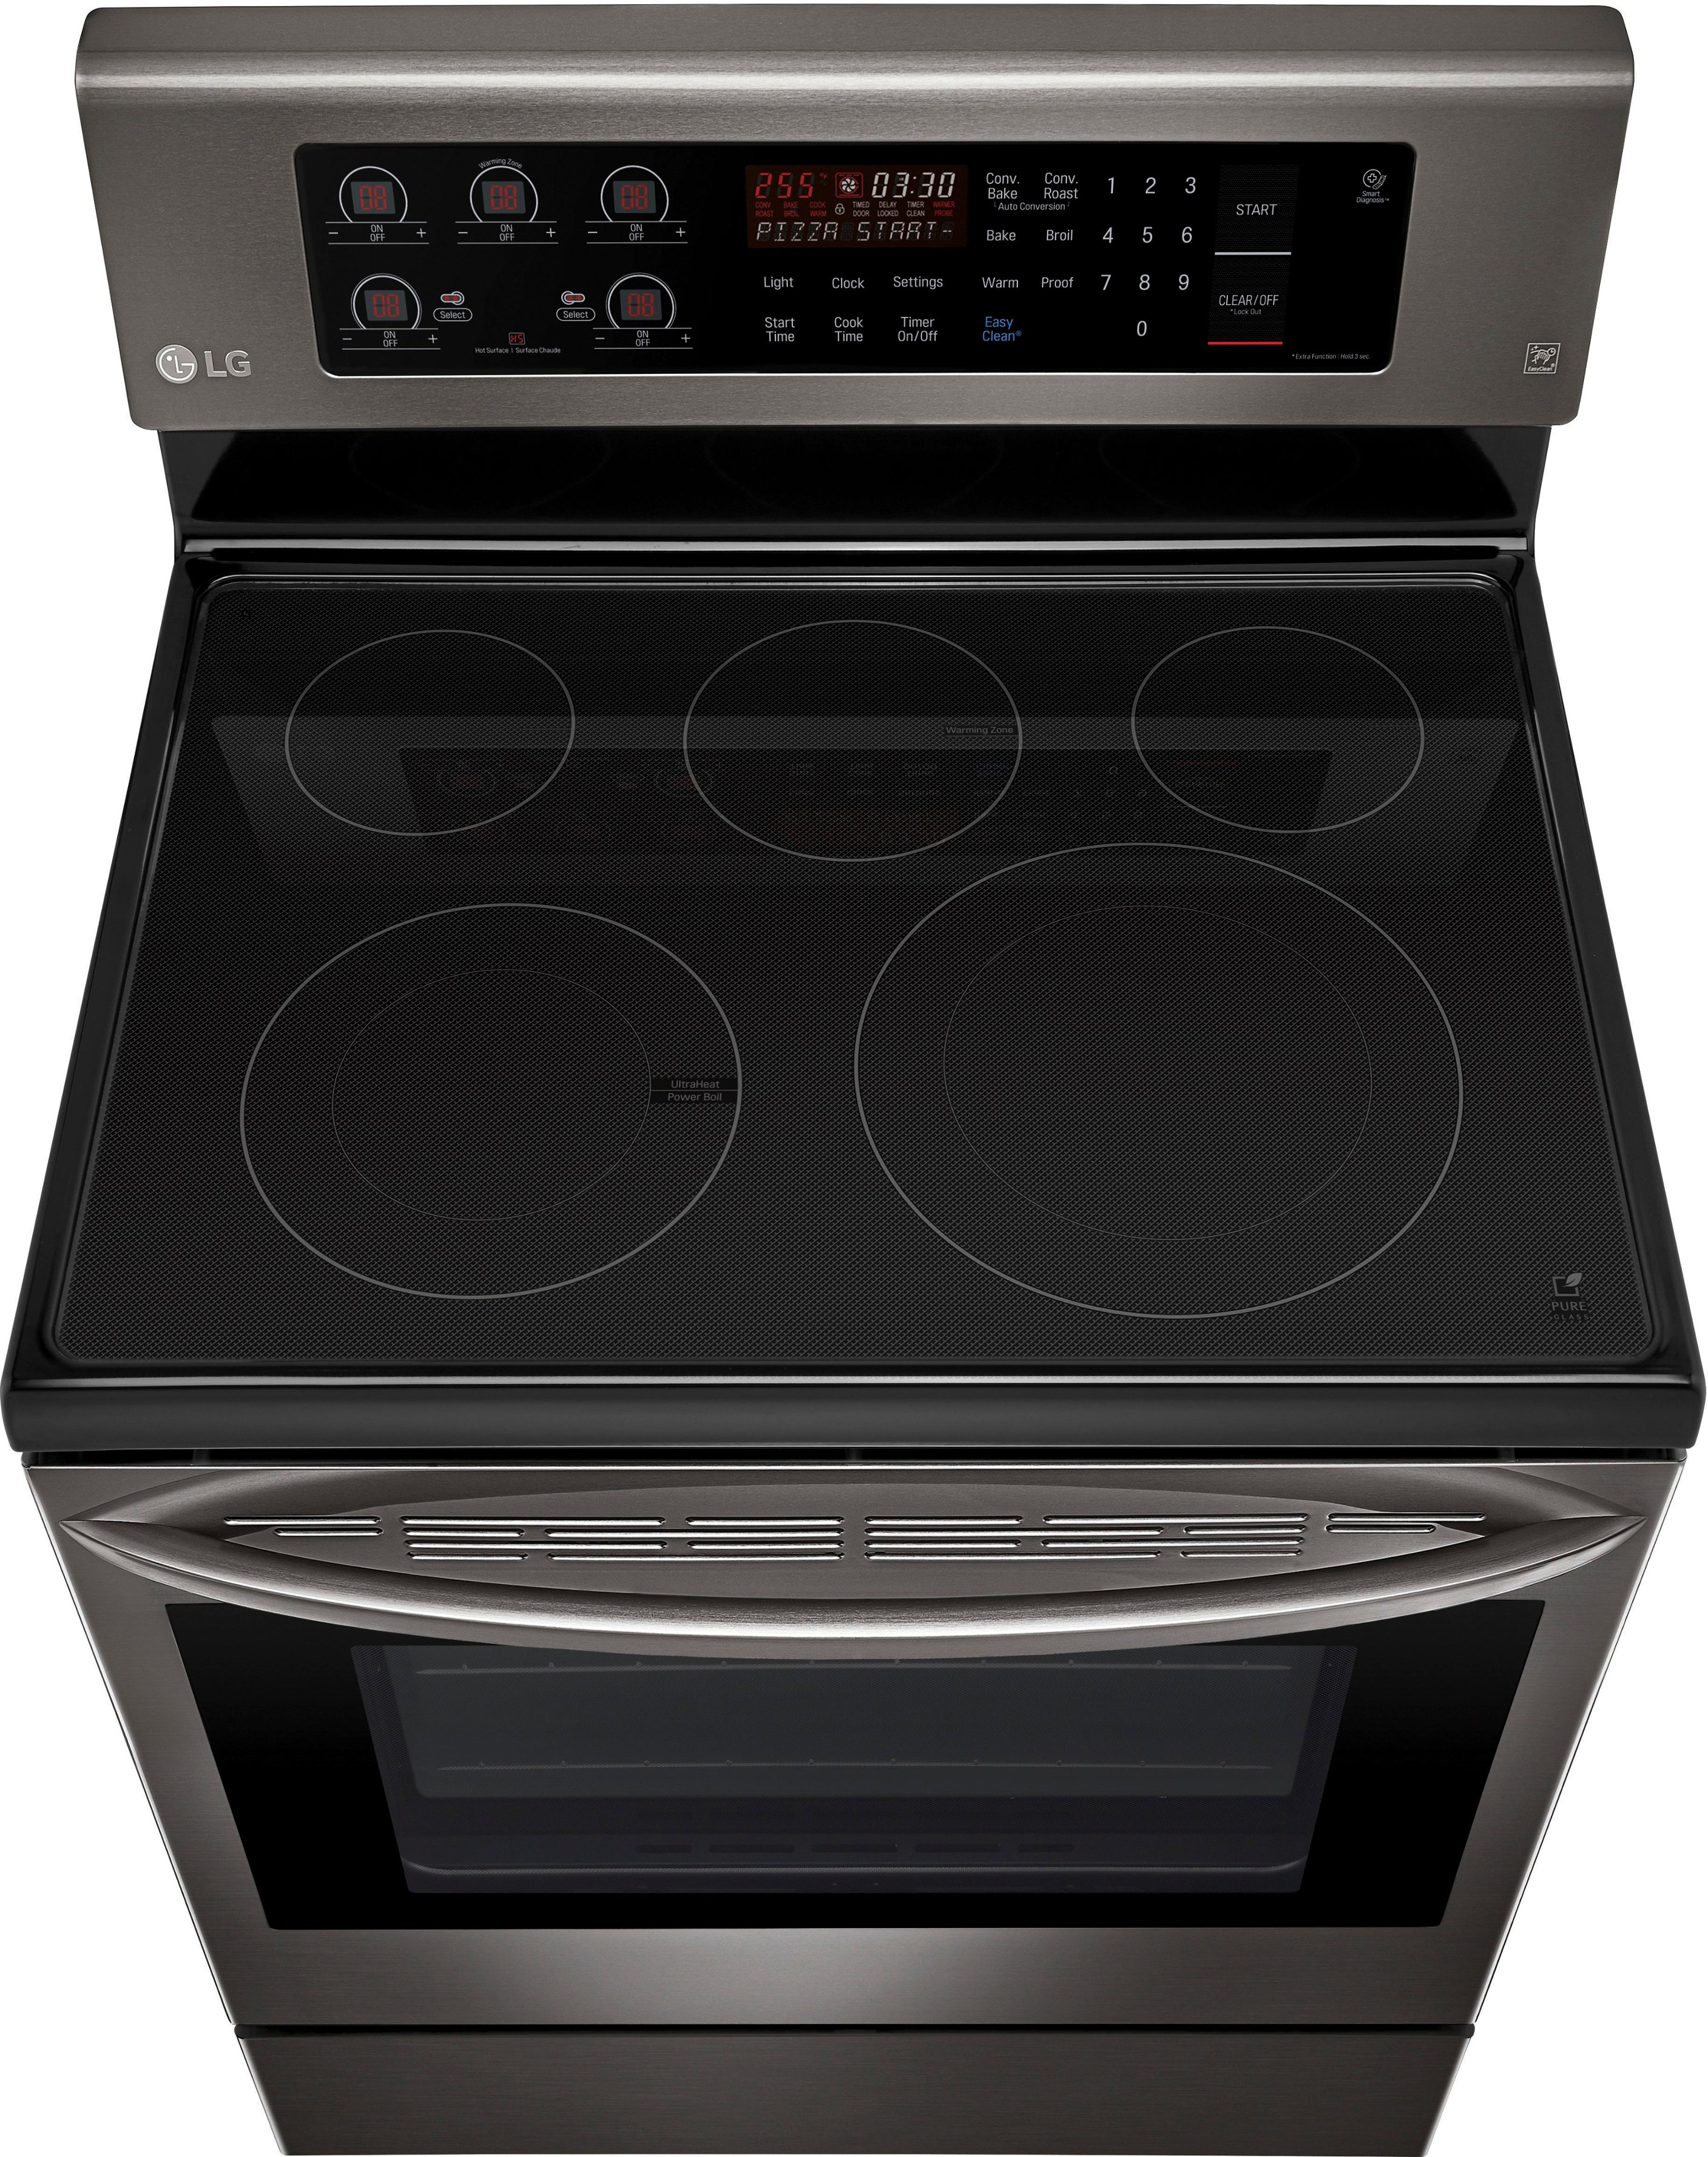 Customer Reviews Lg 6 3 Cu Ft Freestanding Electric Convection Range Black Stainless Steel